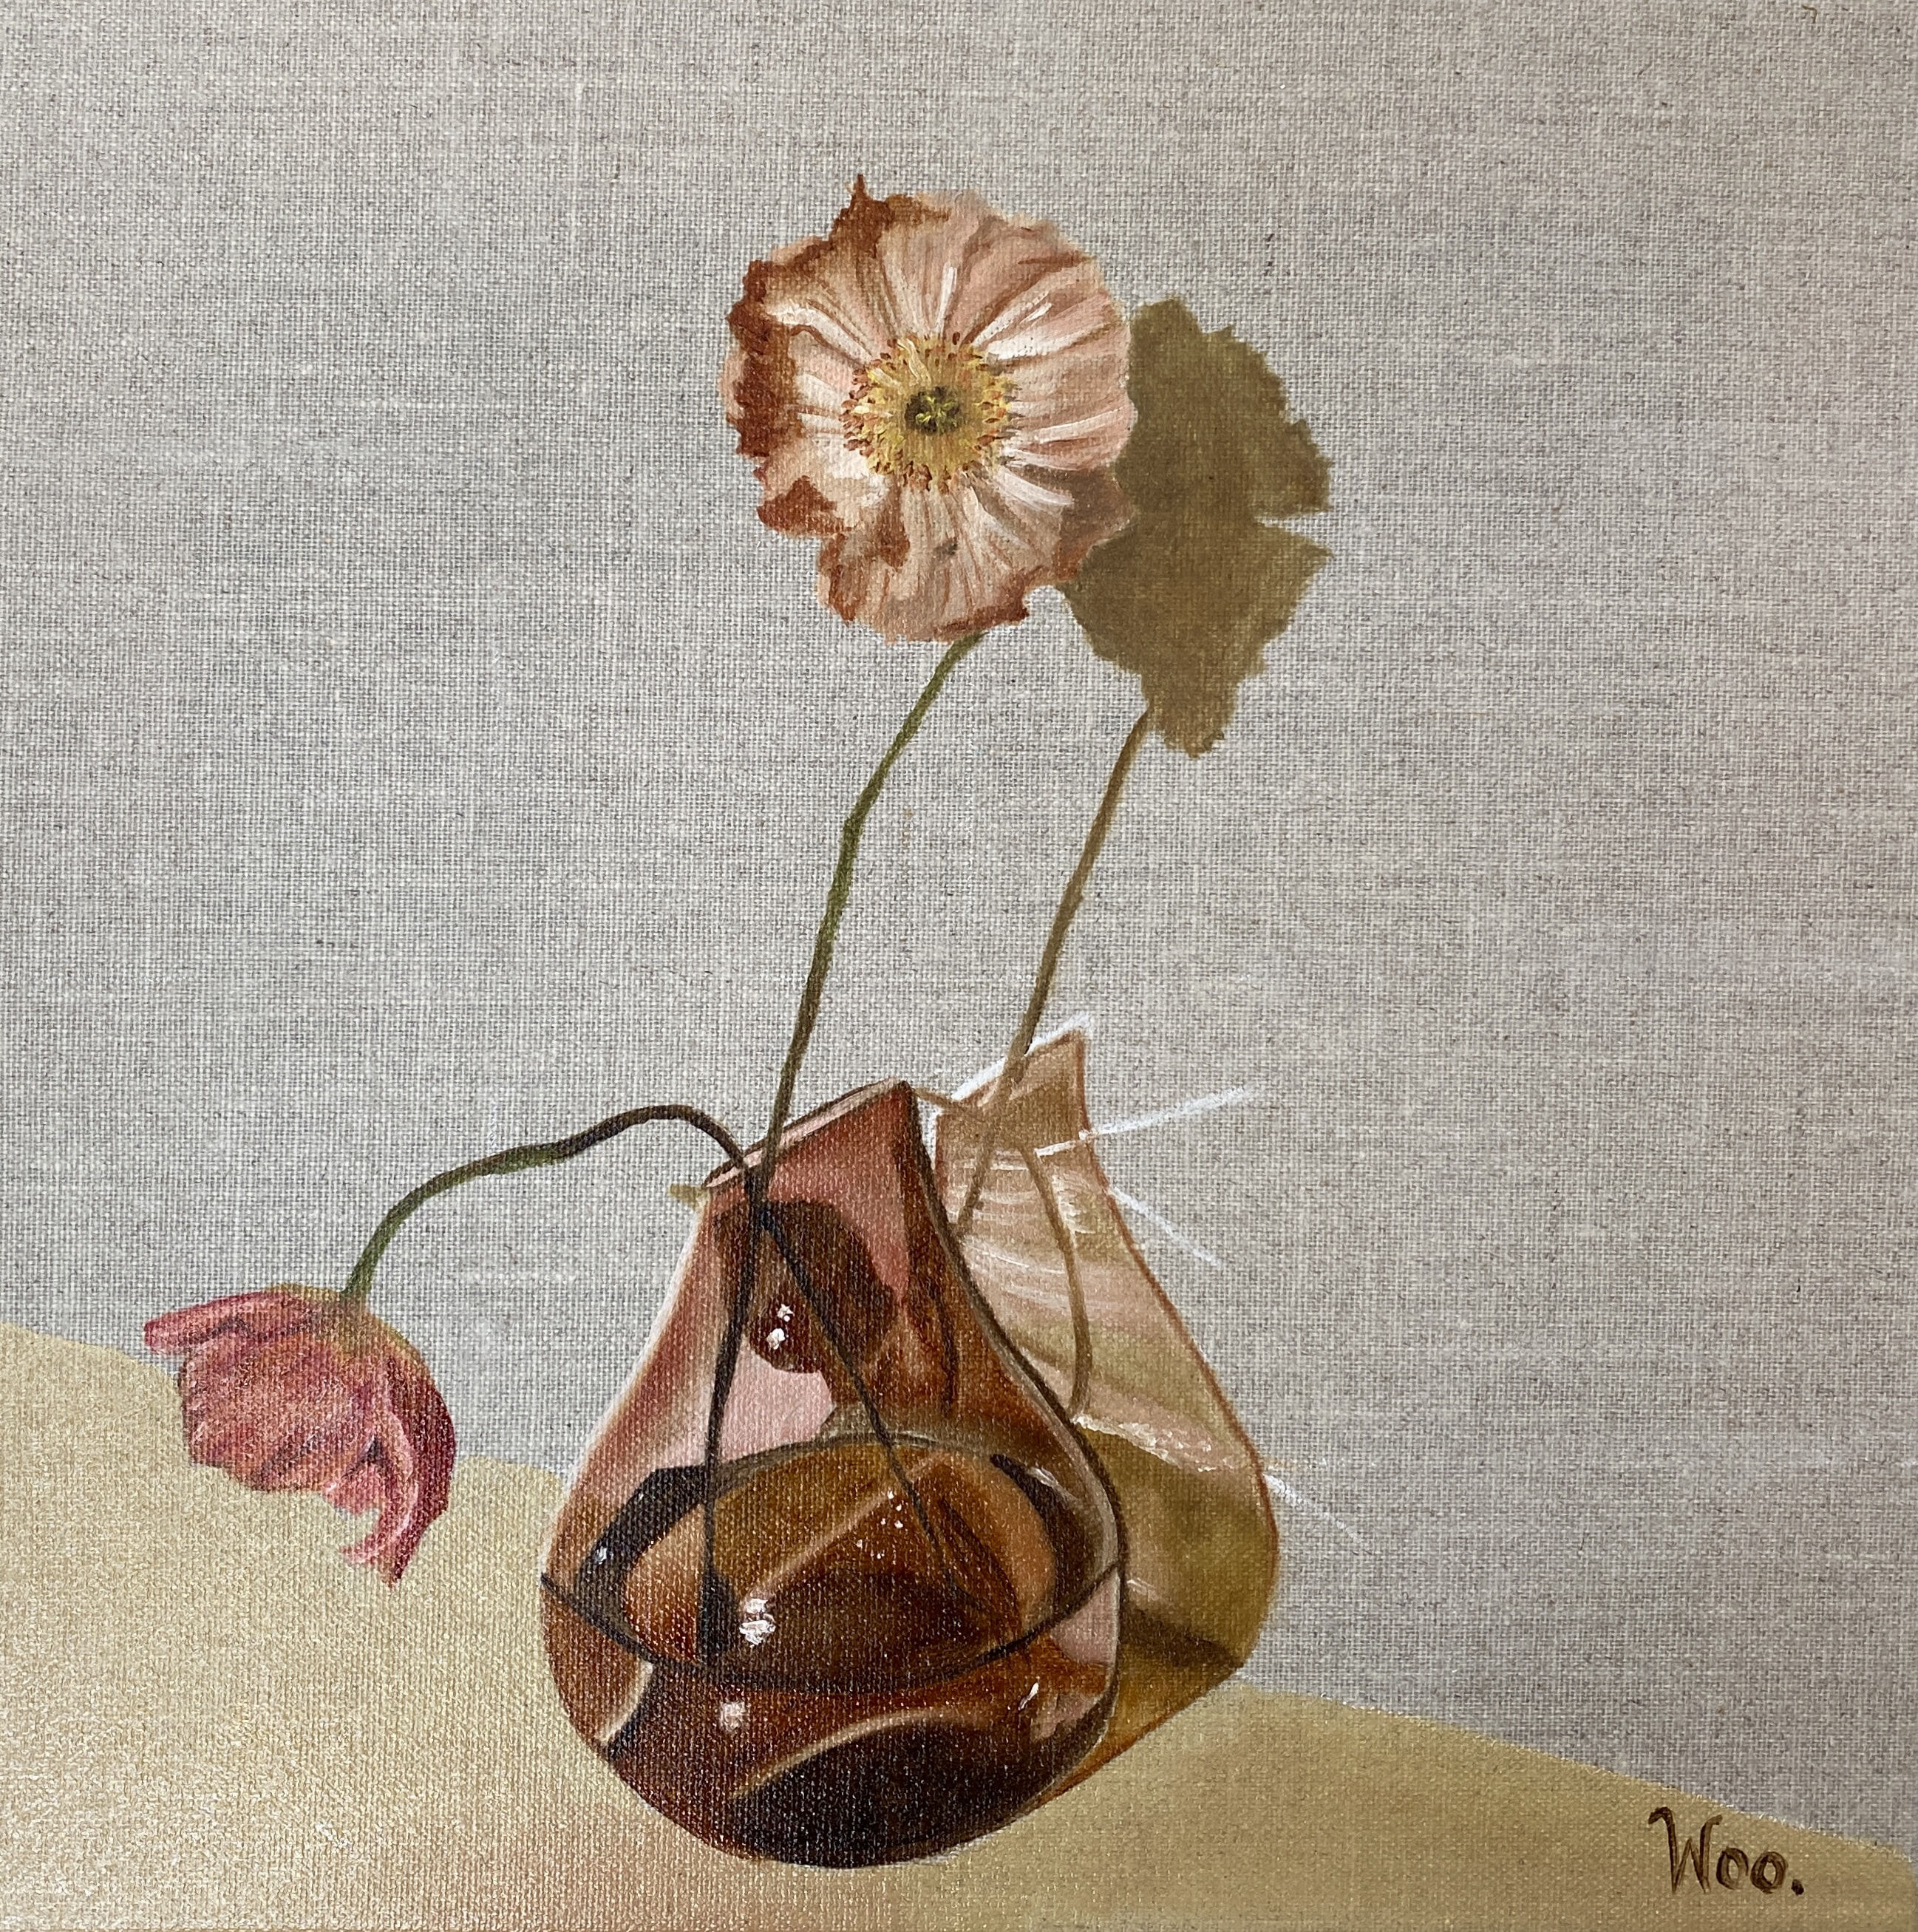 Amber_Poppies_30x30 oil on linen_Wendy_Peters